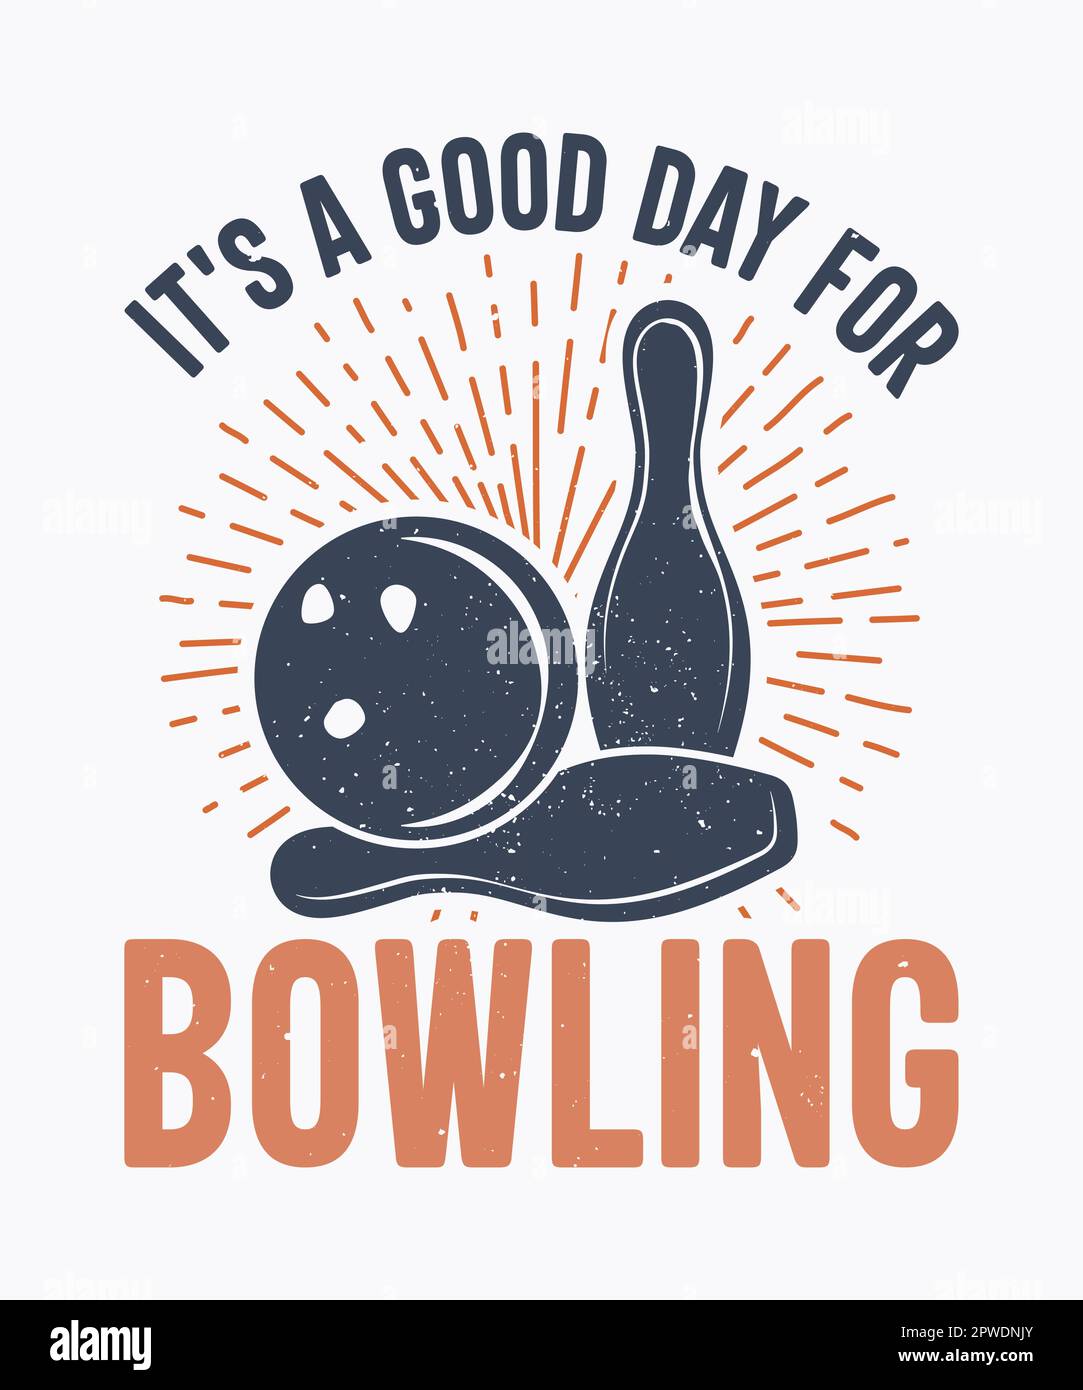 It's a good day for bowling T-shirt design  with bowling ball and pin bowling vintage illustration Stock Vector